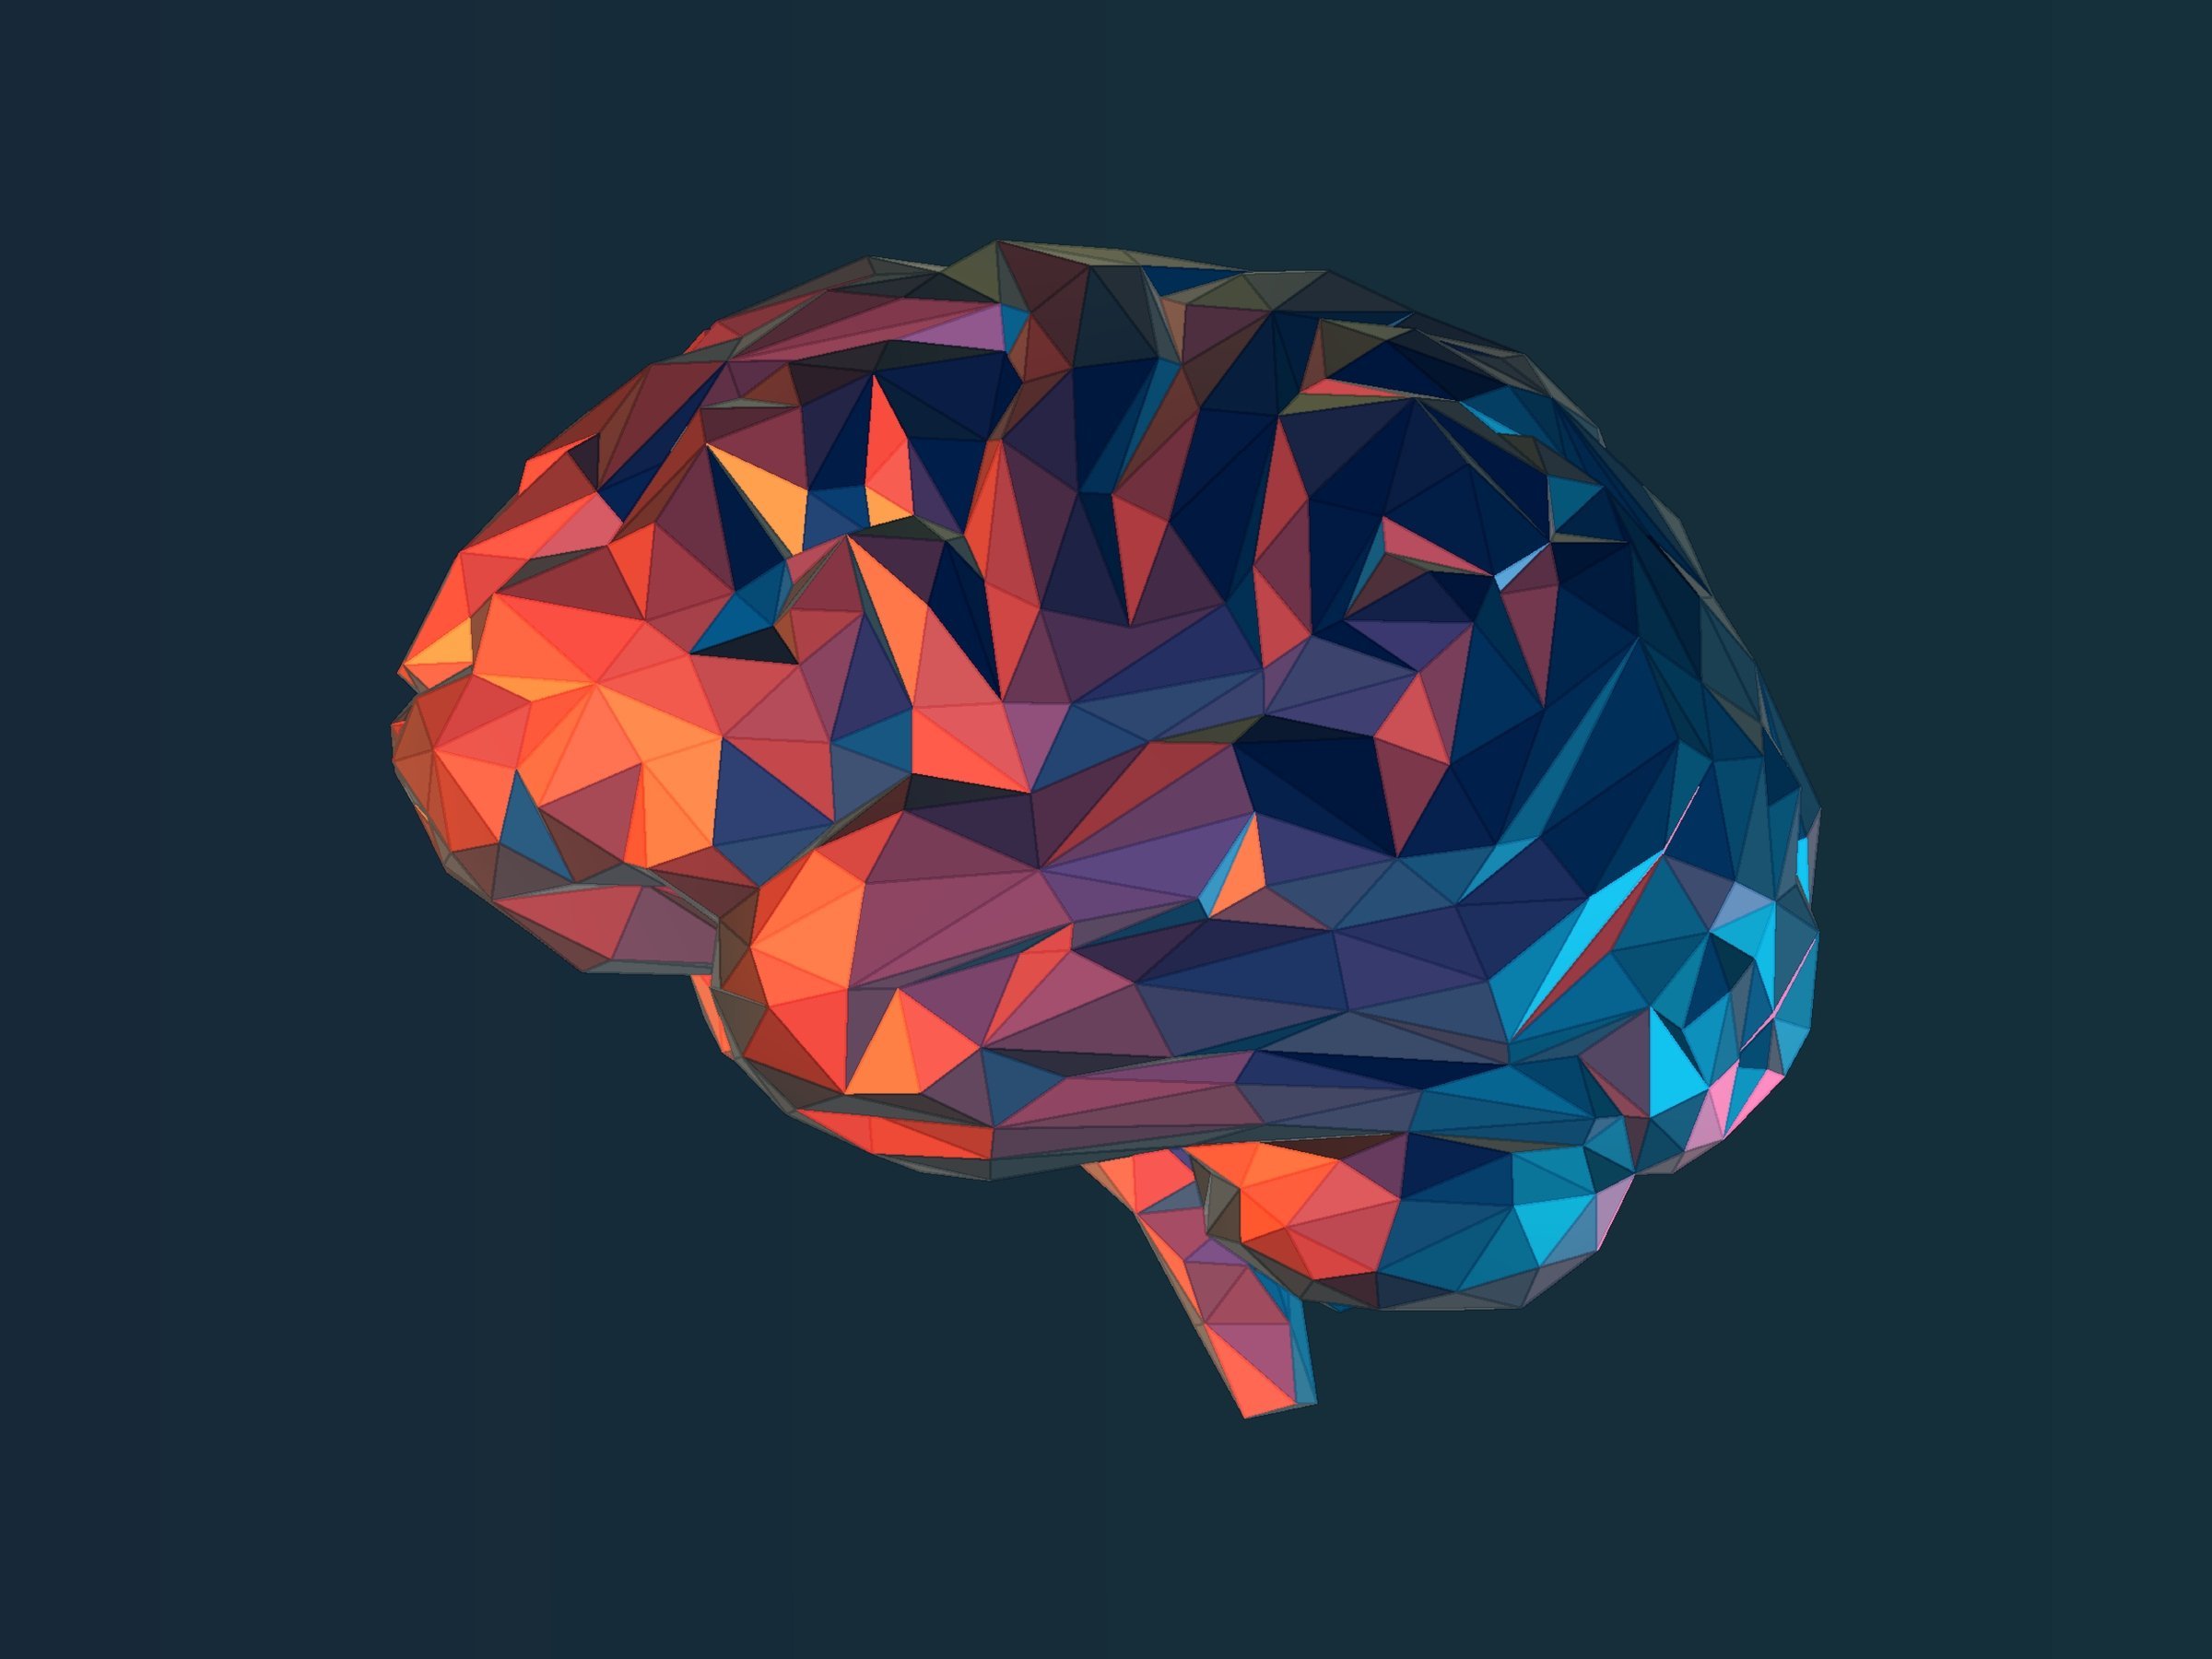  Ongoing Roundtable Discussion Group:   The Cognitive Neuroscience of Religious Cognition   Exploring the Brain Correlates of Religious Beliefs and Practice    3rd Virtual Meeting, June 16 at 11 AM CT    Register  